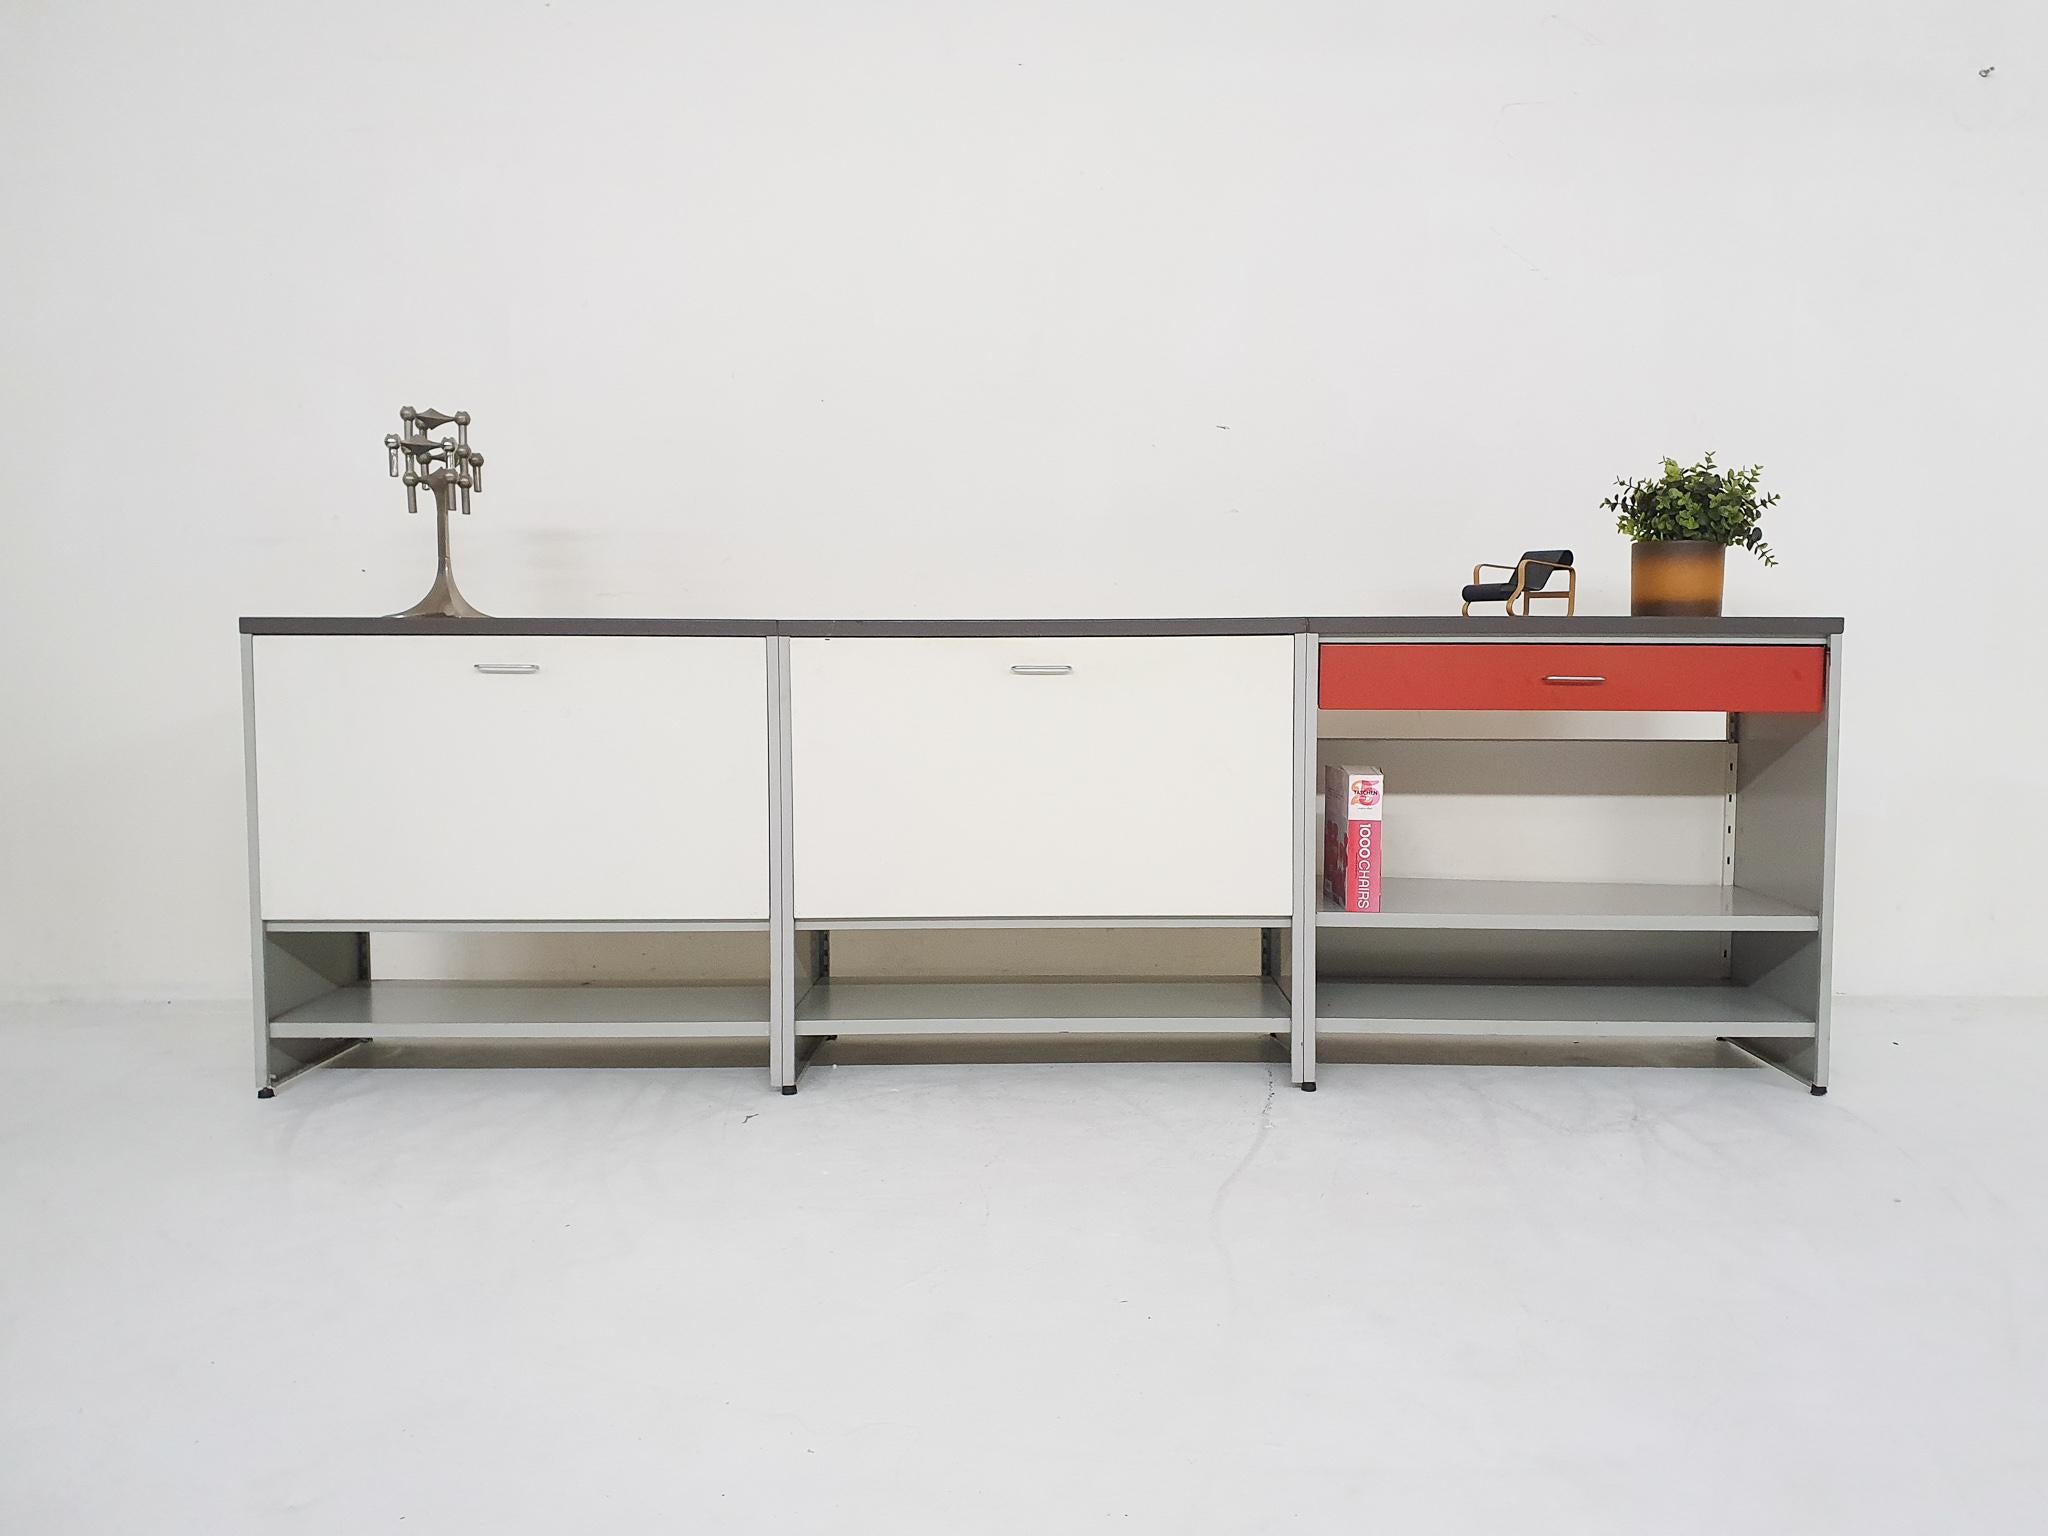 Industrial Sideboard by A.R. Cordemeyer for Gispen, model 5600, The Netherlands, 1962